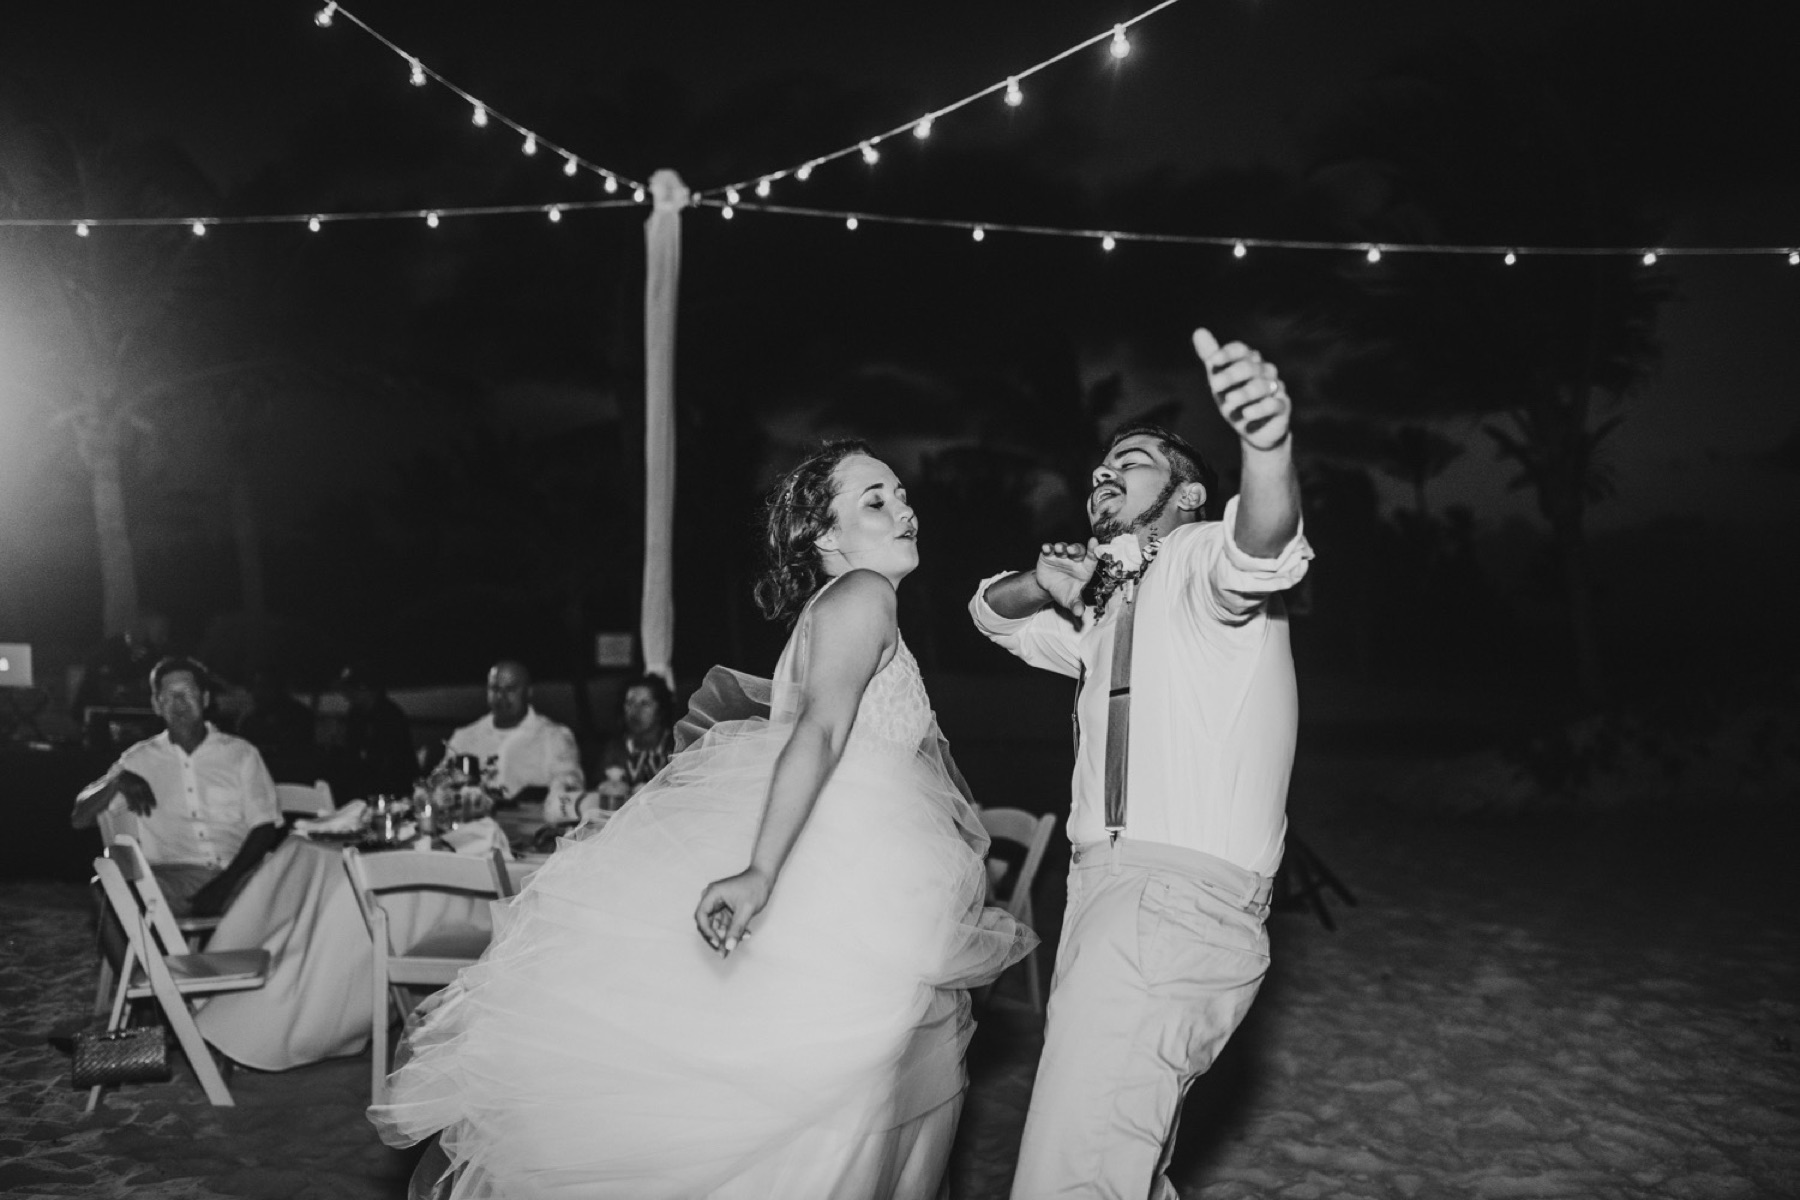 Black and white photo of bride and groom getting their groove on at their wedding